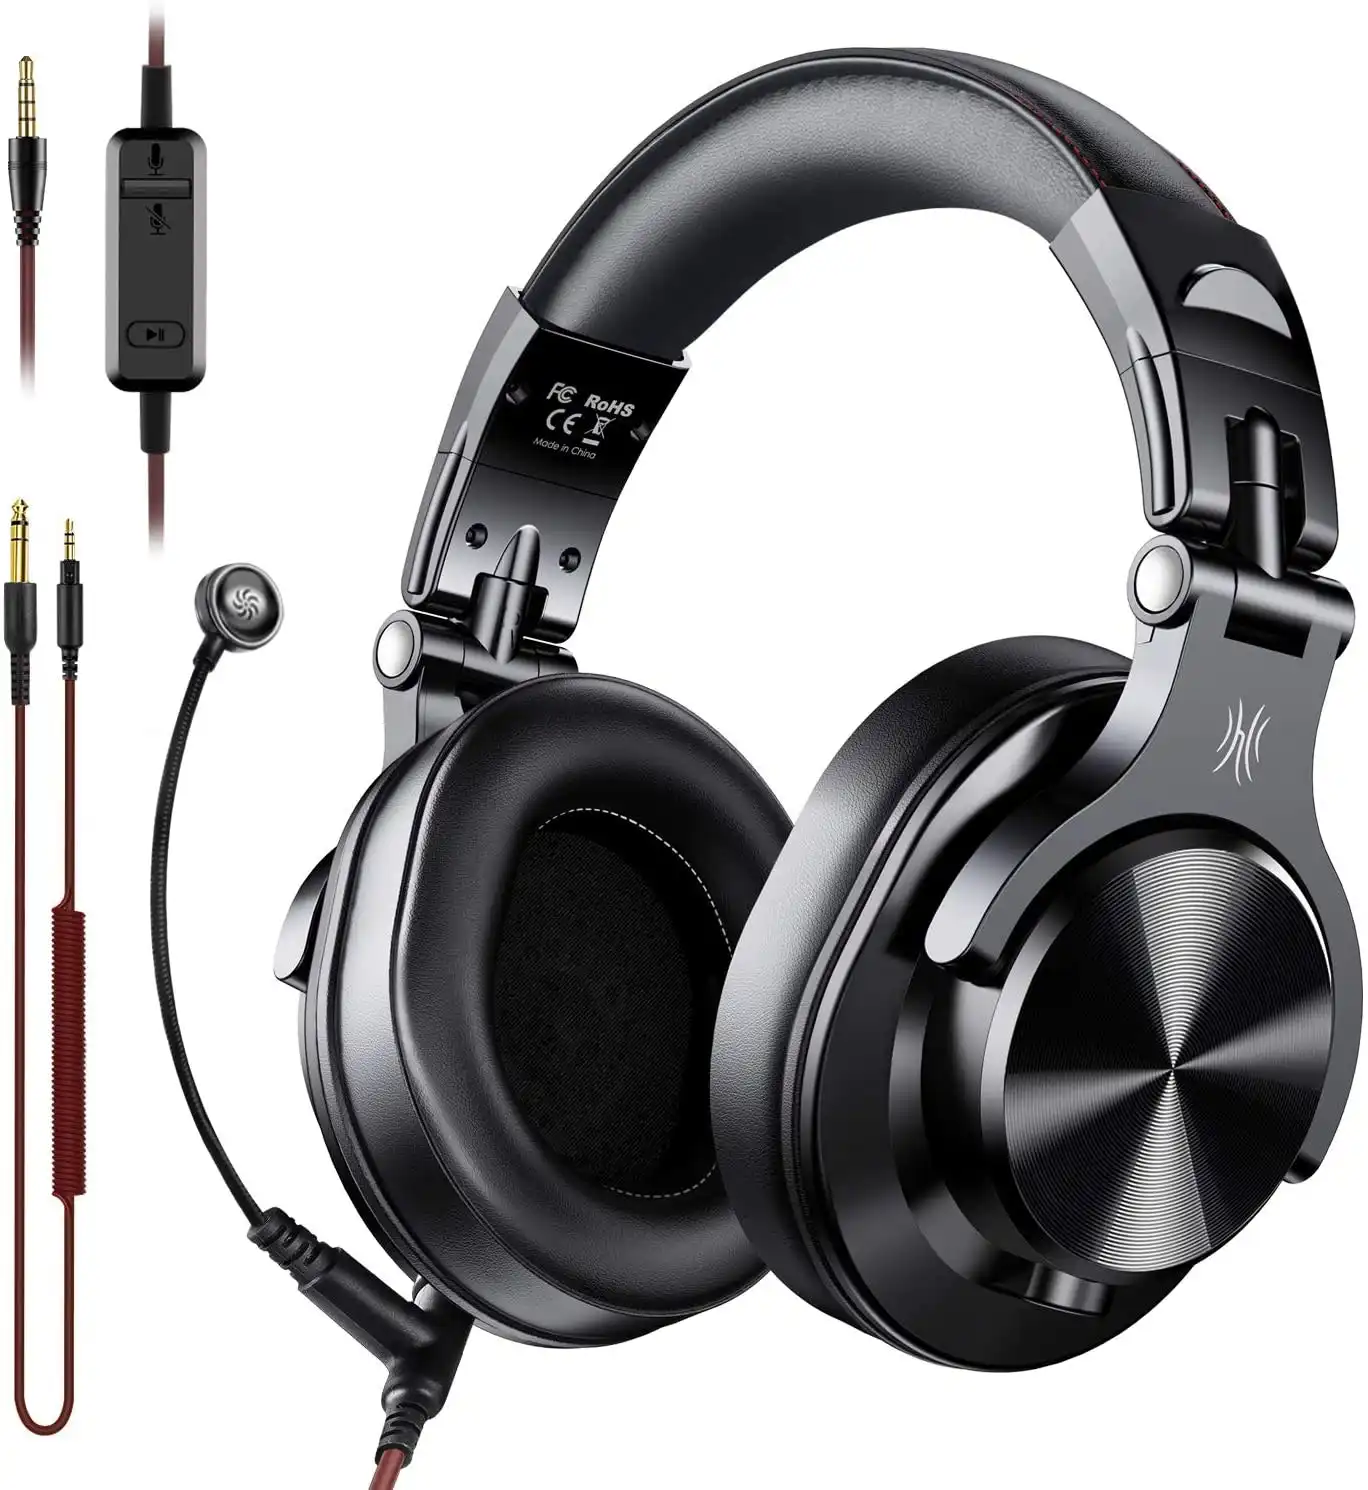 OneOdio A71 Over Ear Headsets with Boom Mic - PS4 Xbox One PC Laptop Wired Stereo Headphones with On-Line Volume & Share-Port Headsets for Gaming Offi